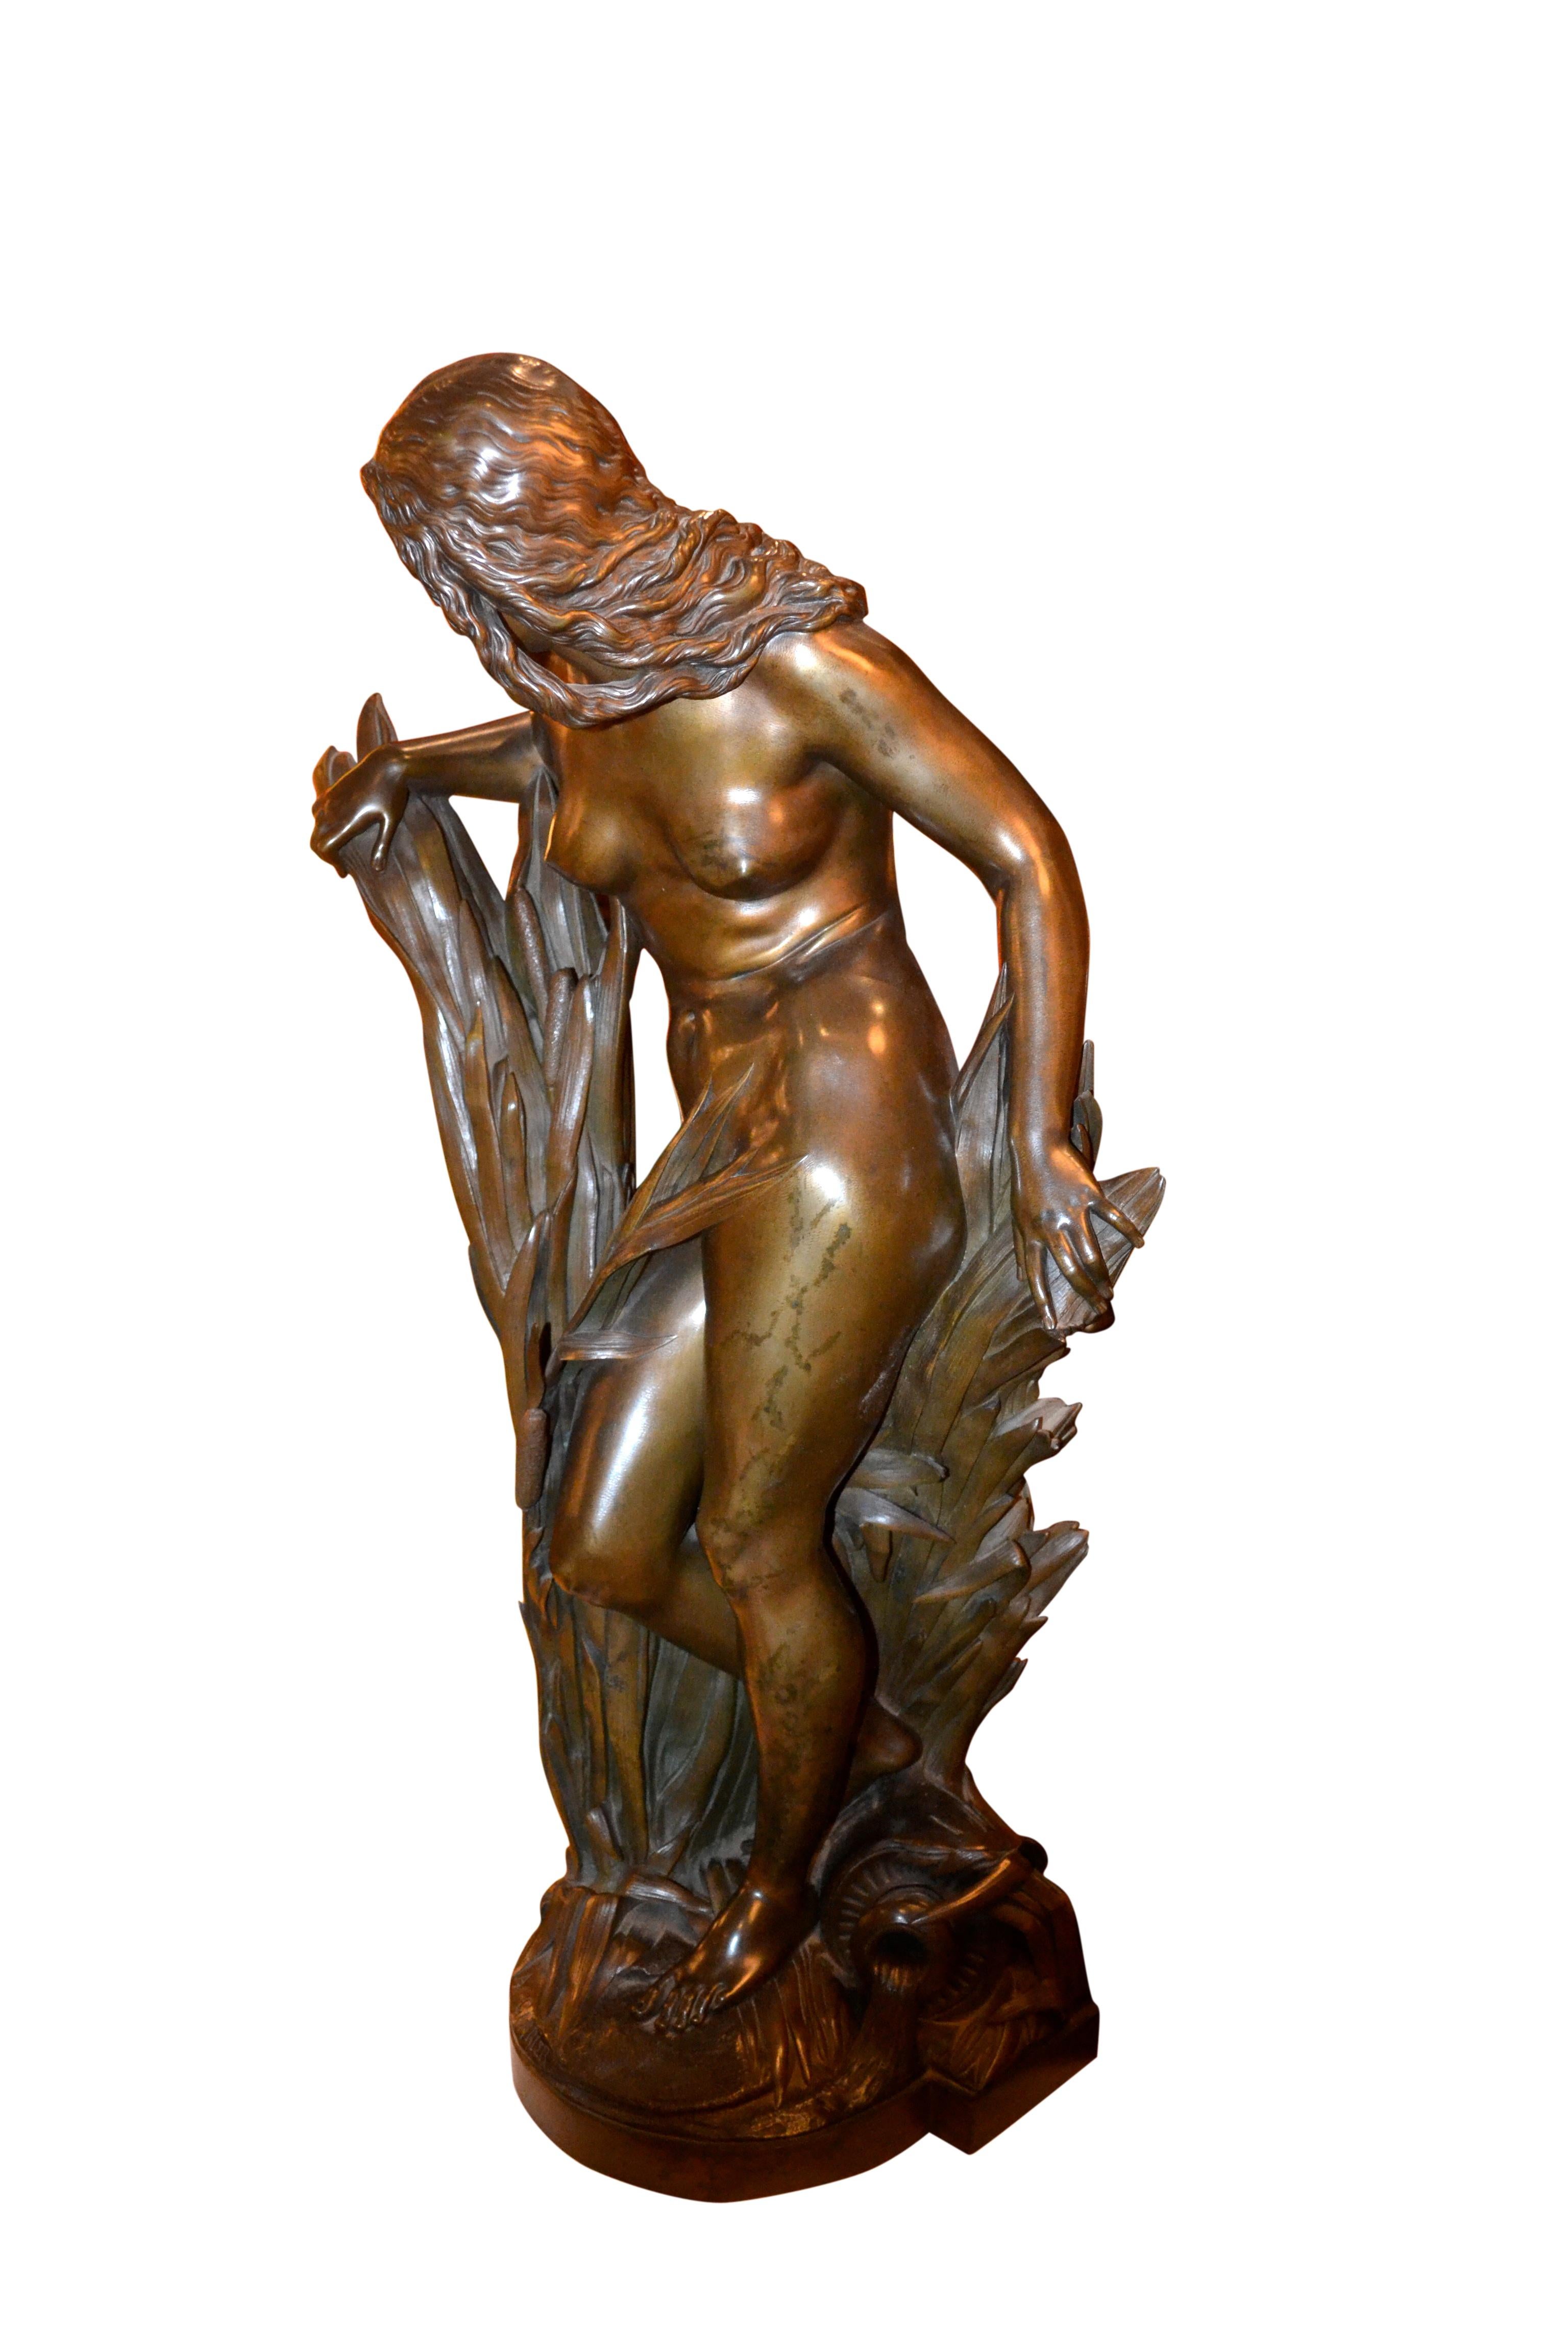 A very fine cast and chased bronze showing a beautiful standing nude nymph, parting and emerging from between tall bull rushes at the edge of a stream. At her feet is a water jug. The bronze is signed A. Carrier with the 